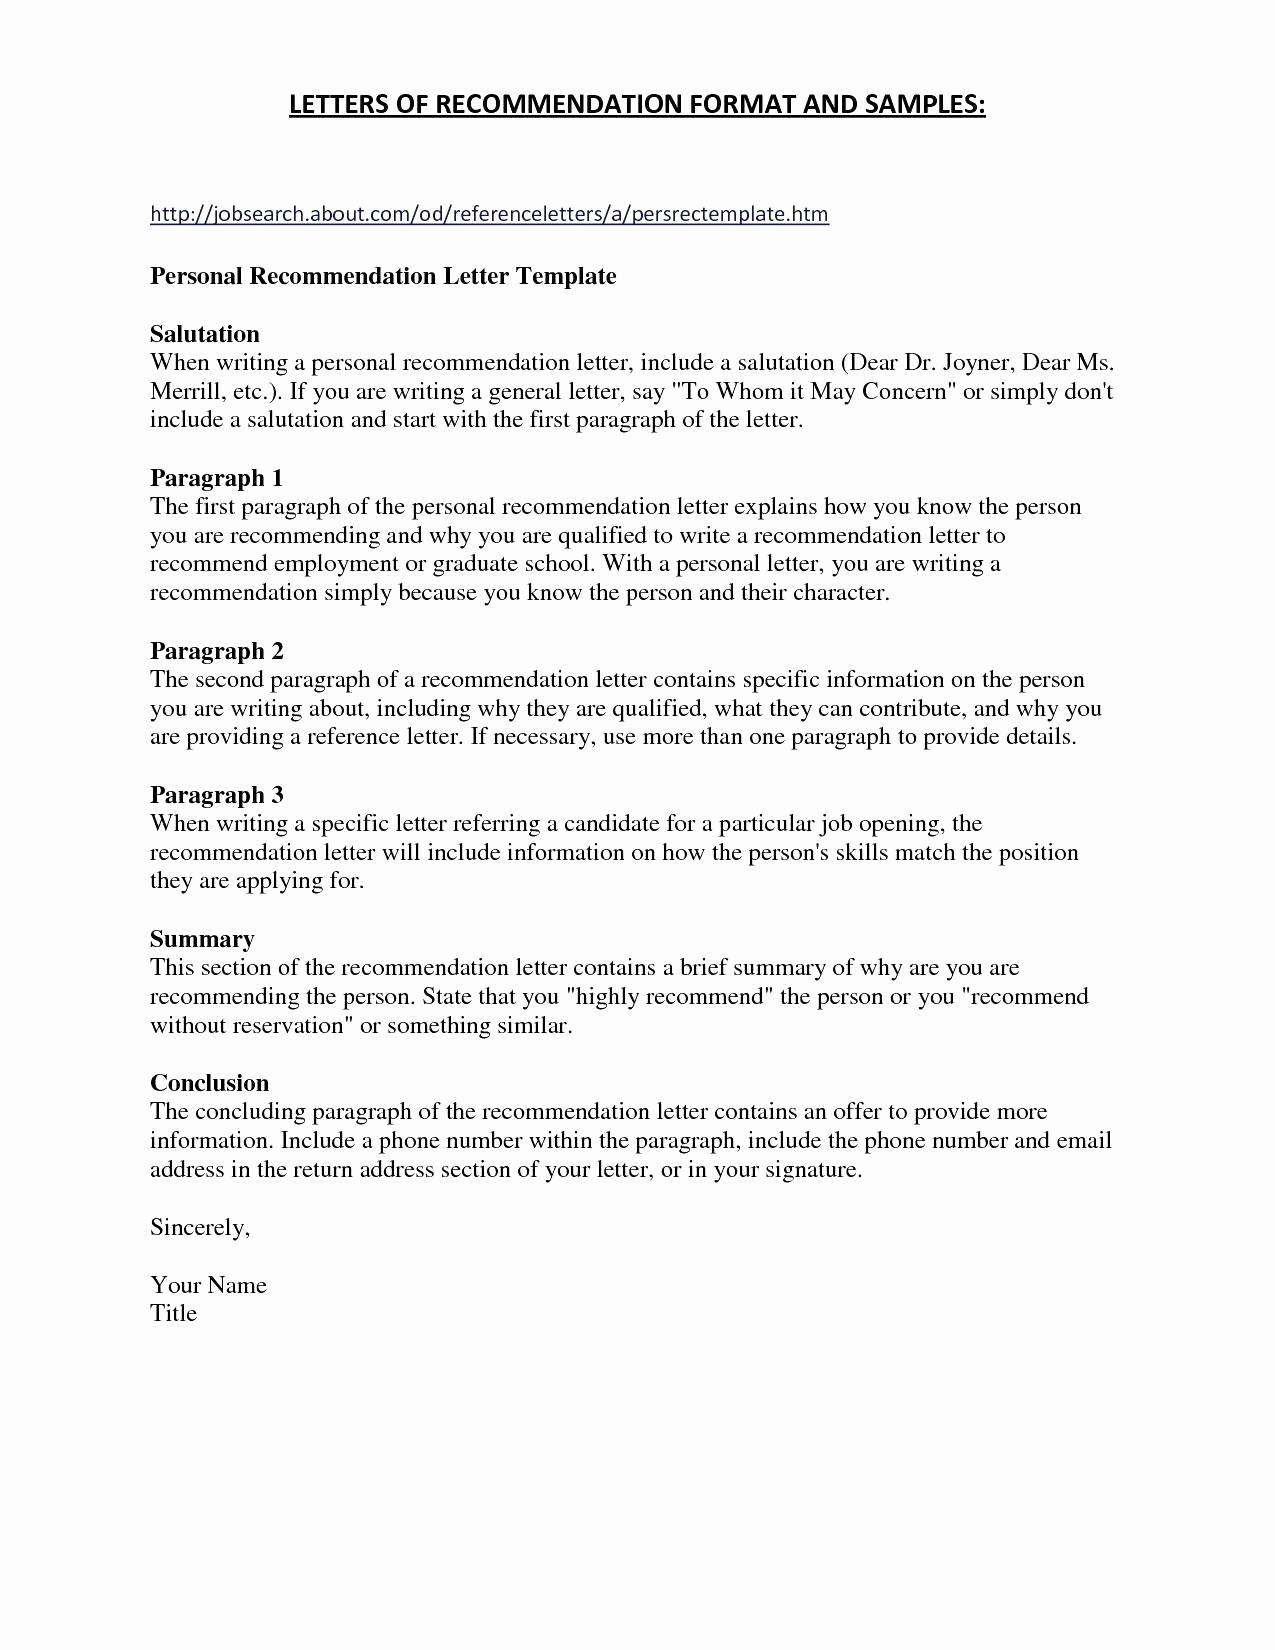 insurance-referral-letter-template-collection-letter-template-collection